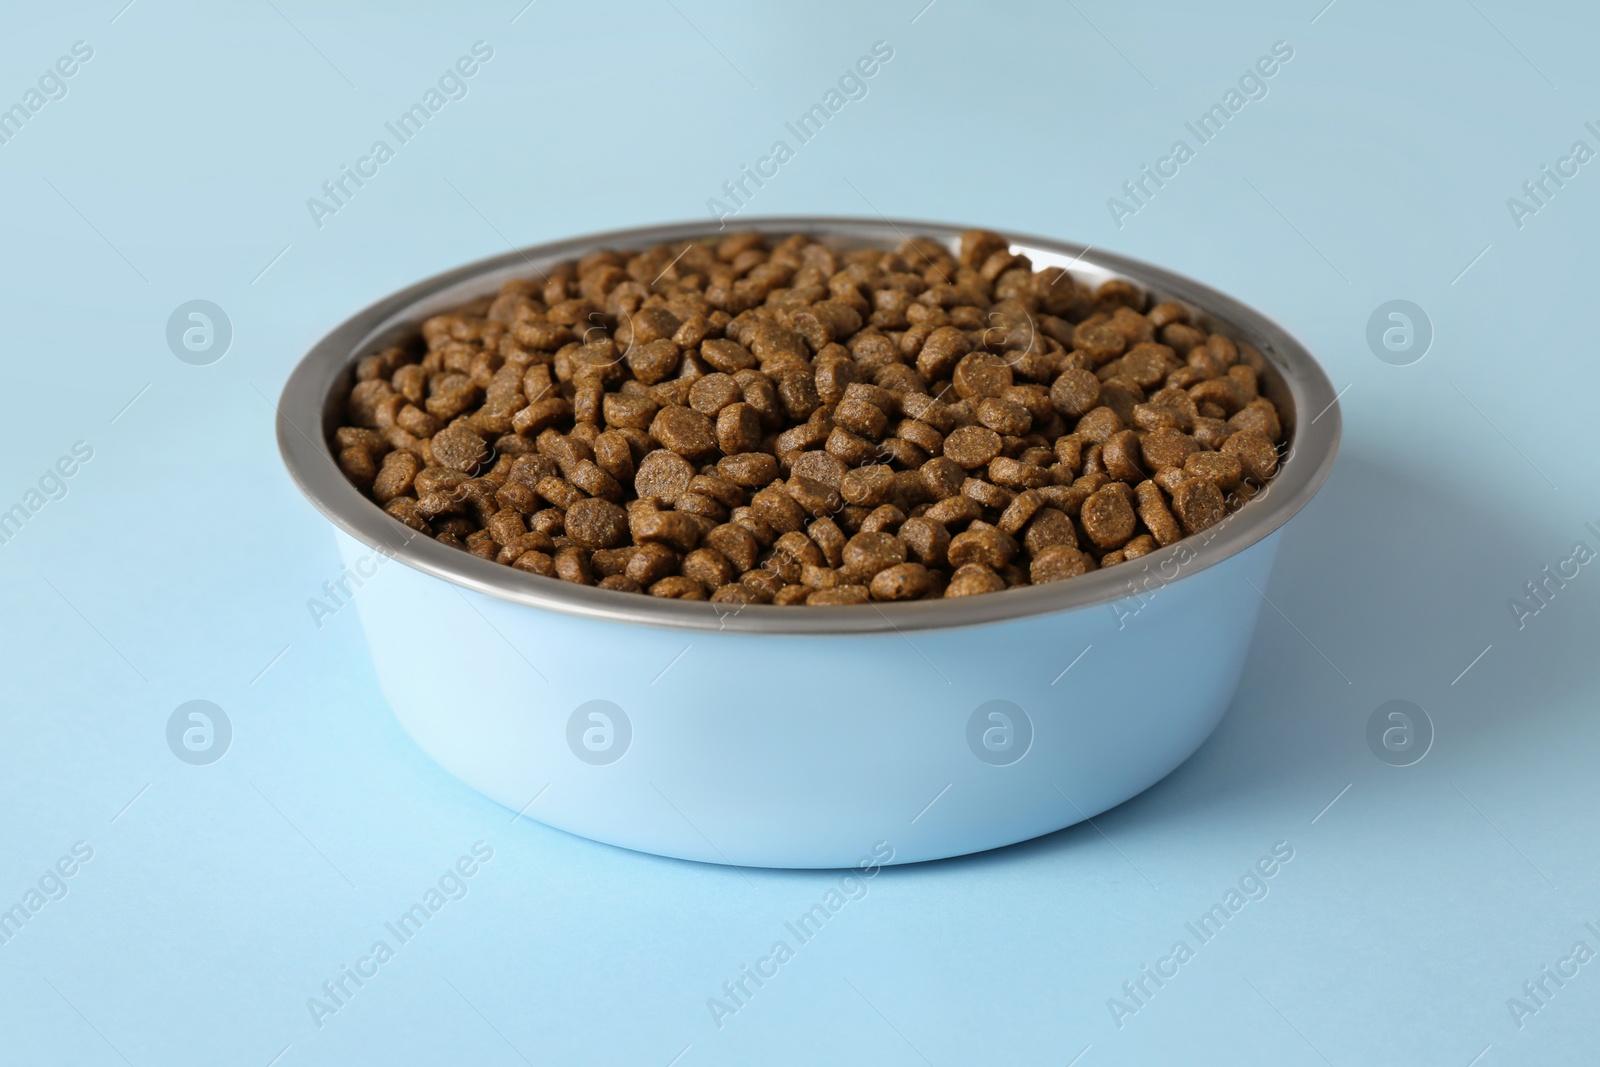 Photo of Dry dog food in pet bowl on light blue surface